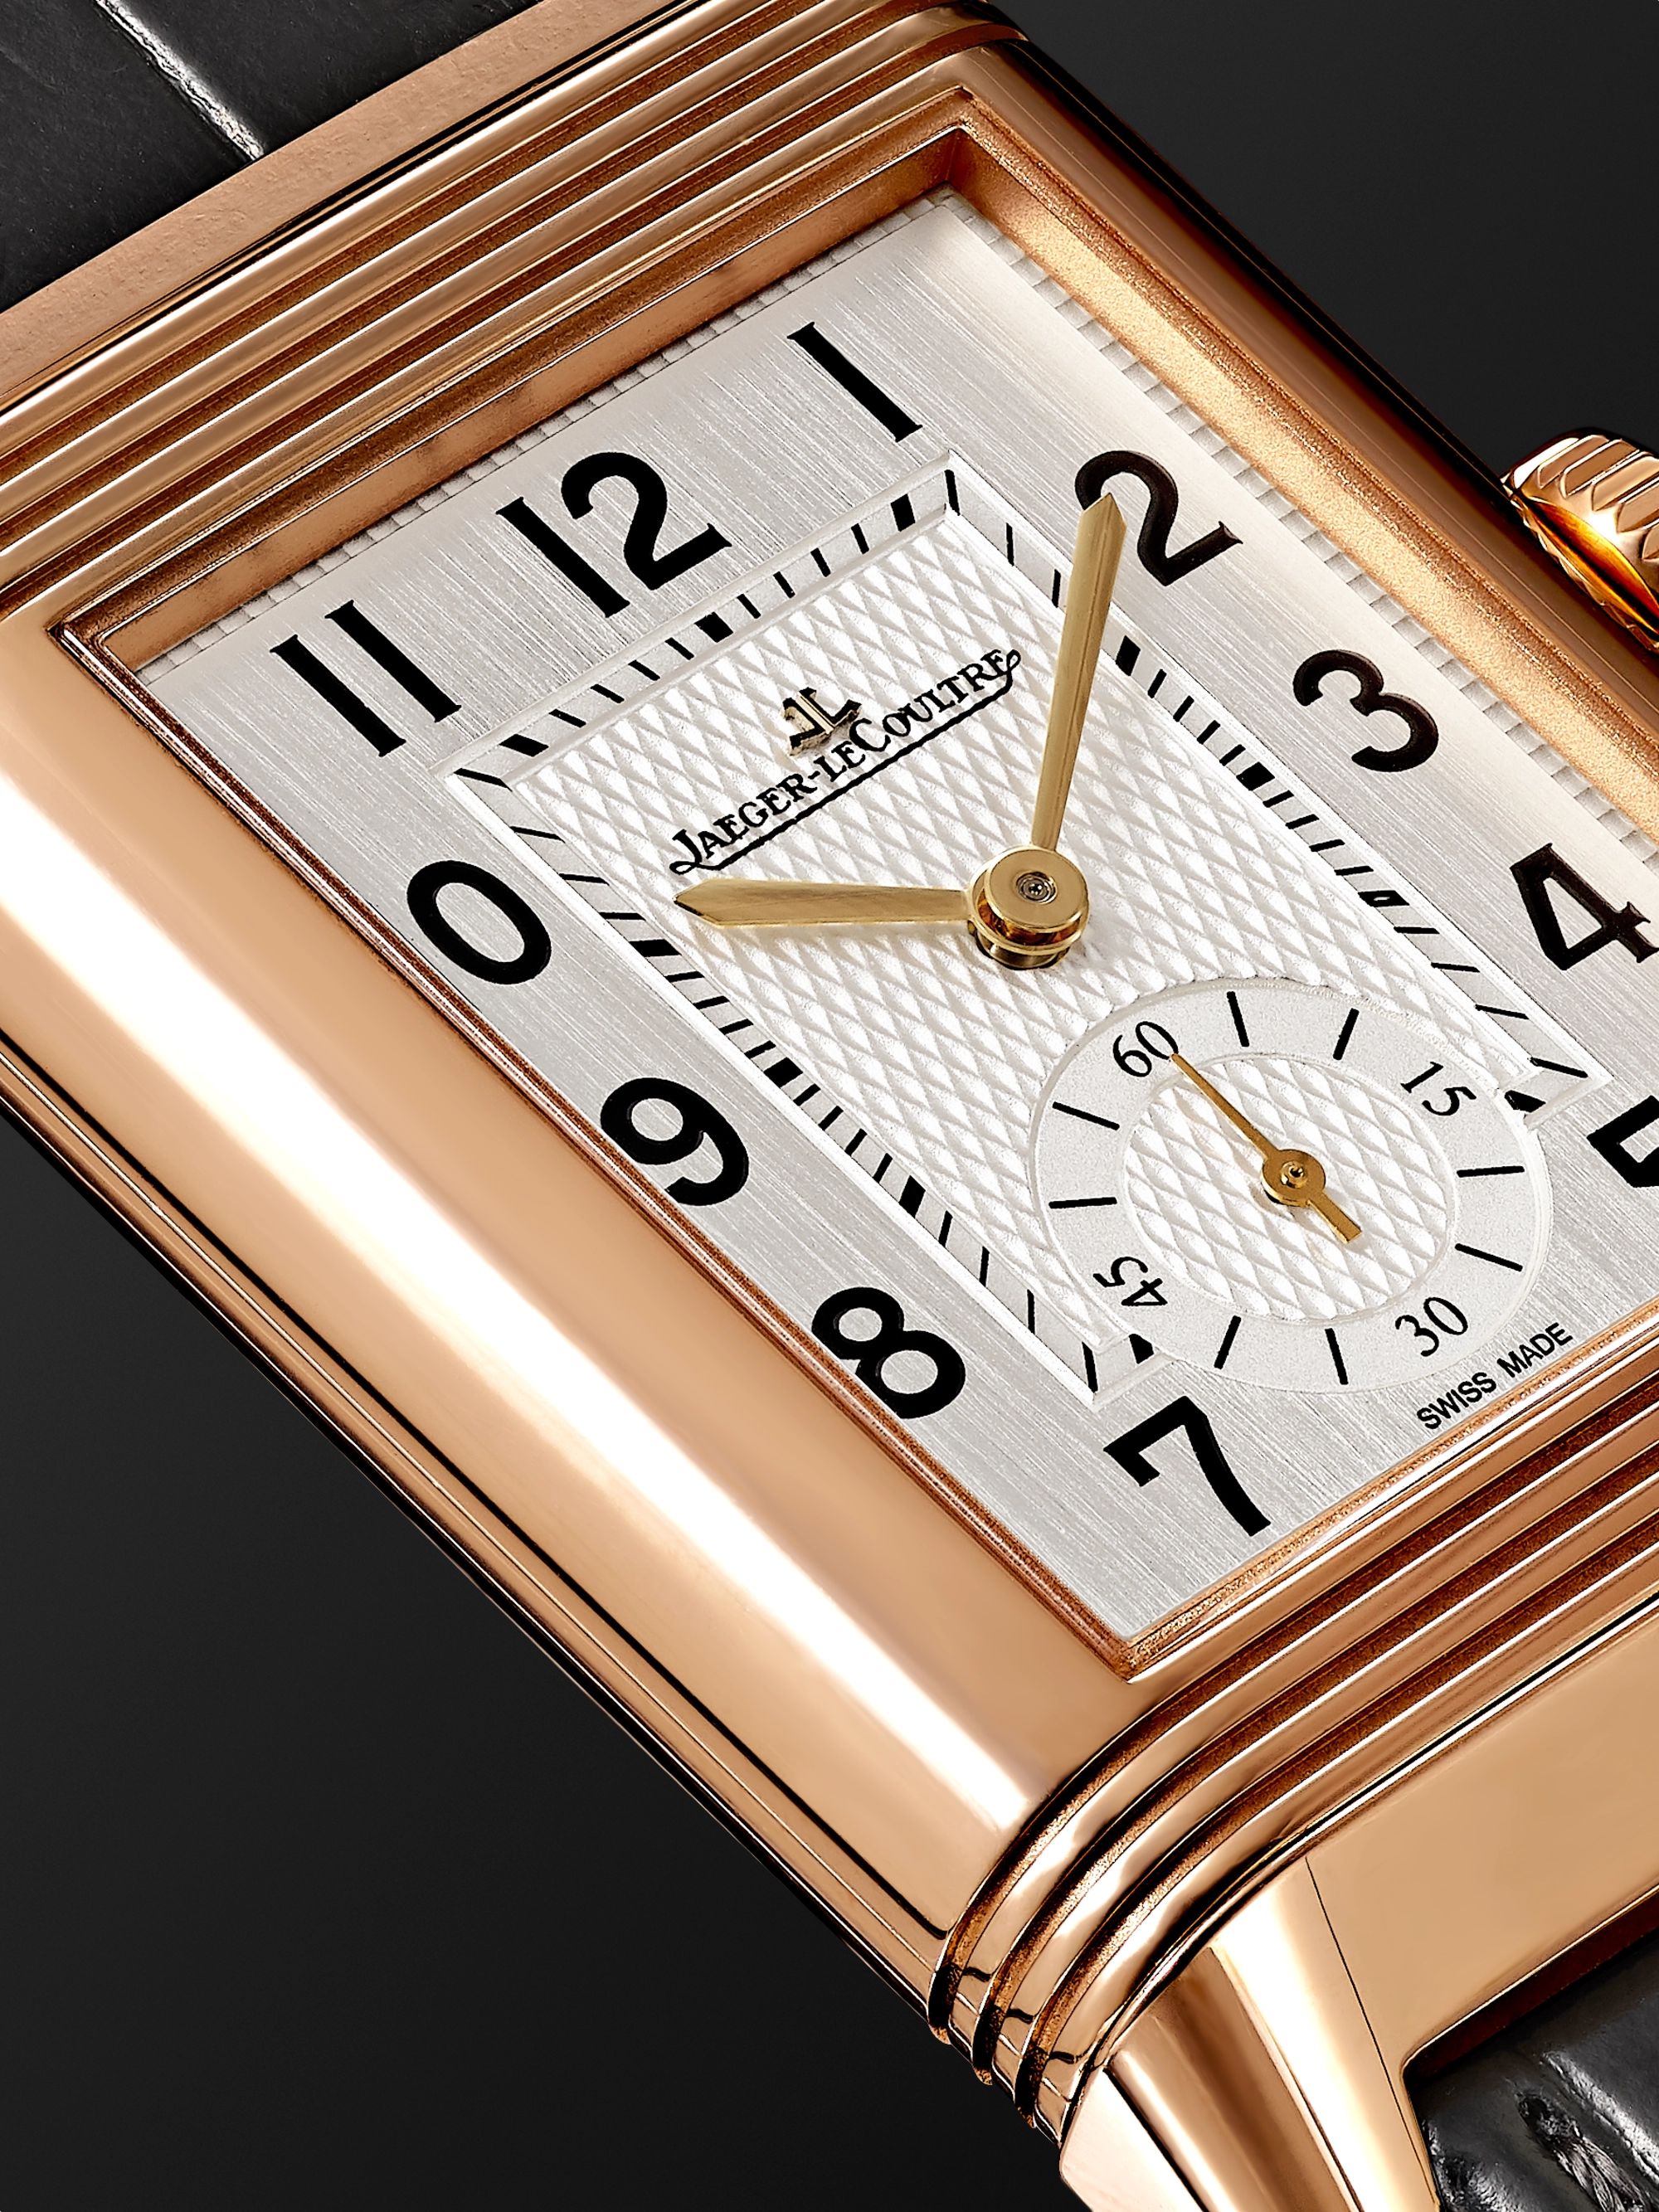 JAEGER-LECOULTRE Reverso Classic Large Duoface Small Seconds Hand-Wound 28.3mm 18-Karat Rose Gold and Alligator Watch